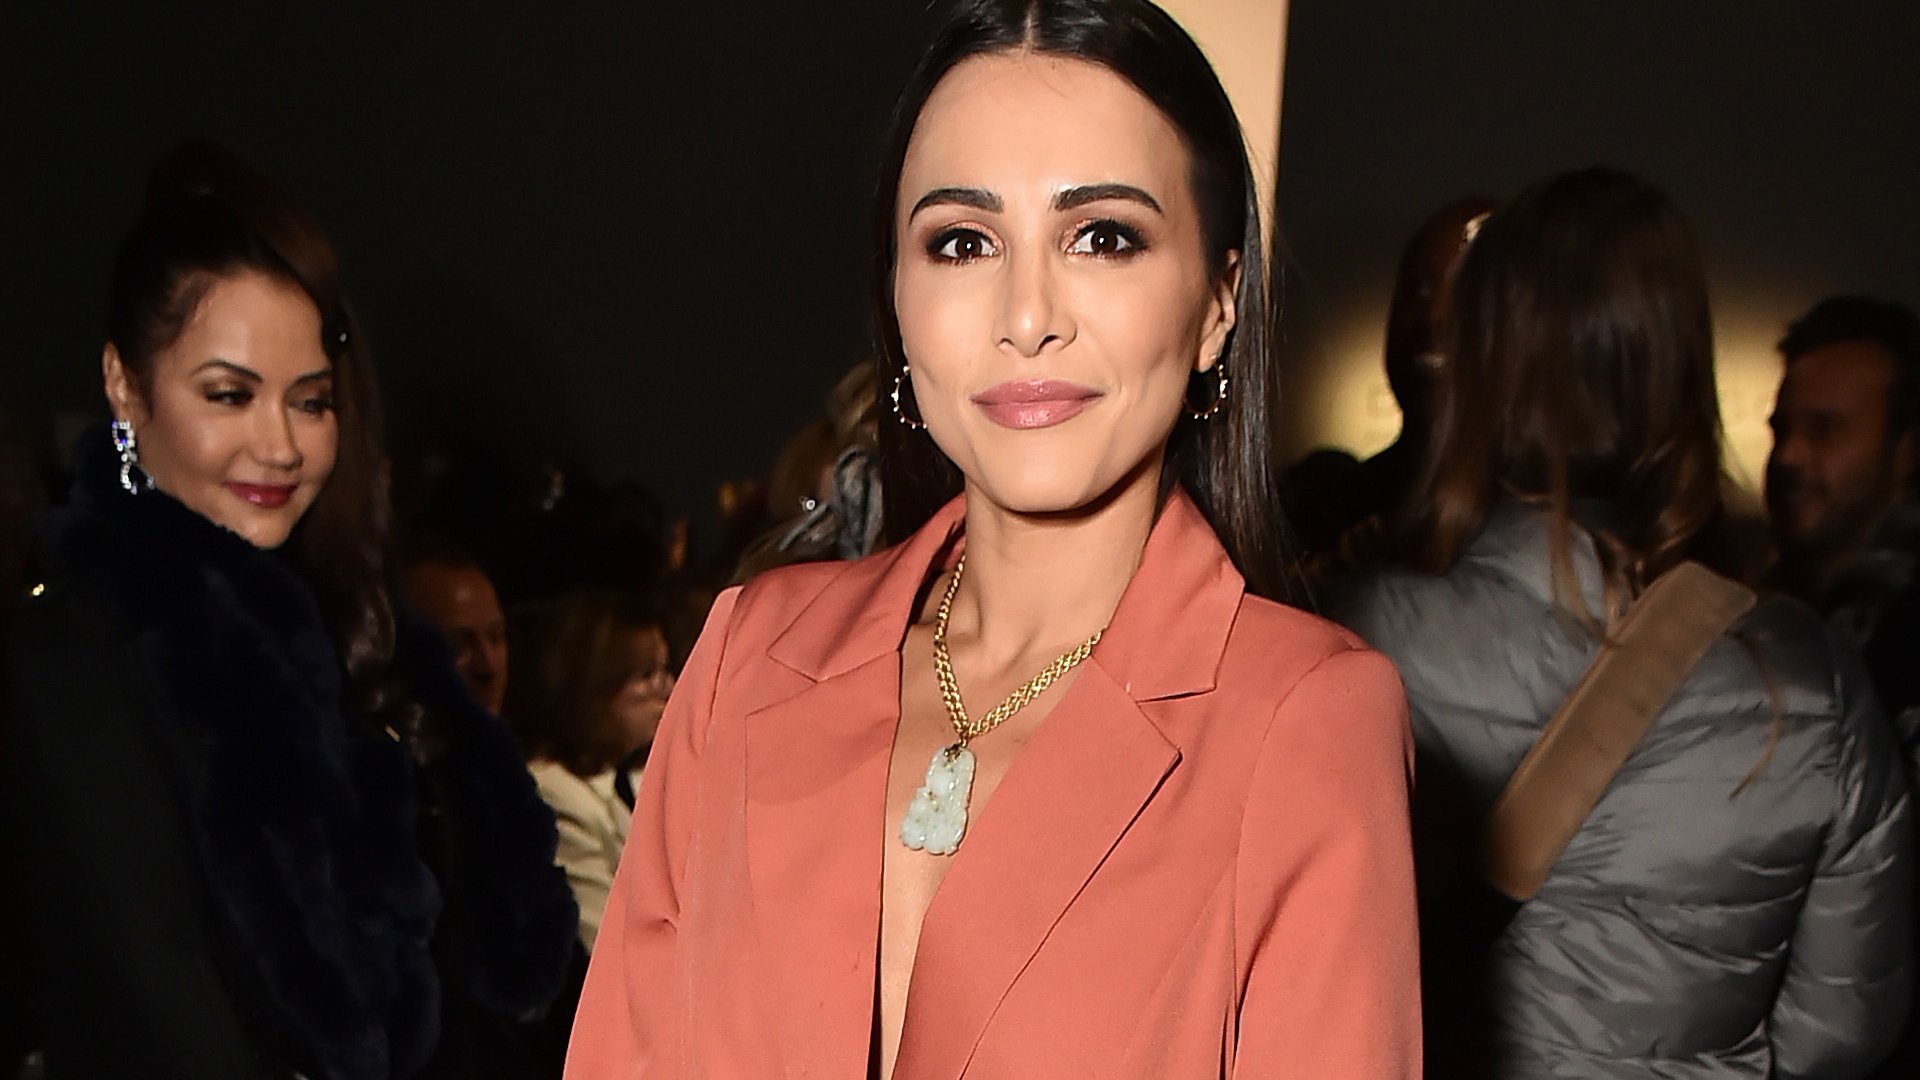 'The Bachelorette' star Andi Dorfman attends the Dennis Basso fashion show during February 2020 - New York Fashion Week: The Shows at Gallery I at Spring Studios on February 09, 2020 in New York City.